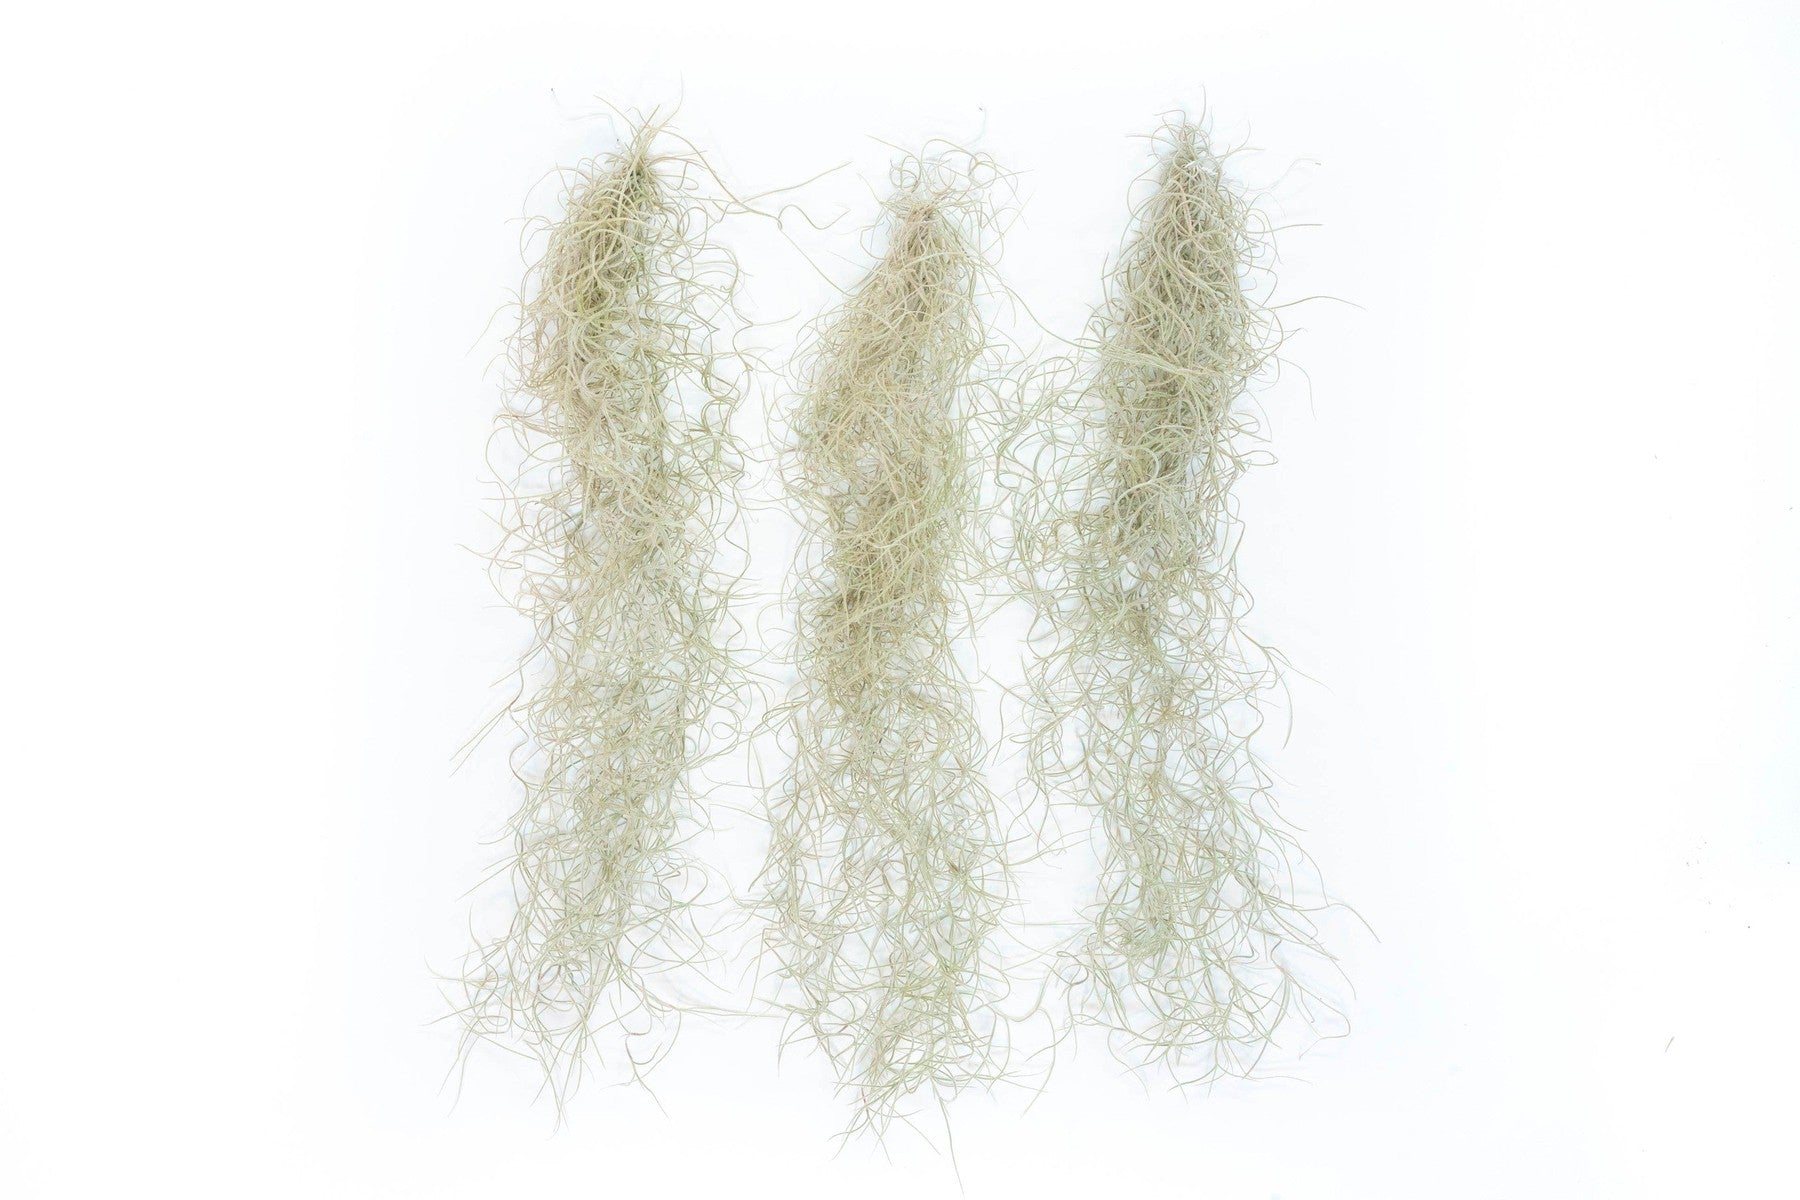 SALE - Tillandsia Guatemala Gray Spanish Moss - 1 Foot Clumps - Set of 3 or 6 Strands - 40% Off-airplant-The Succulent Source